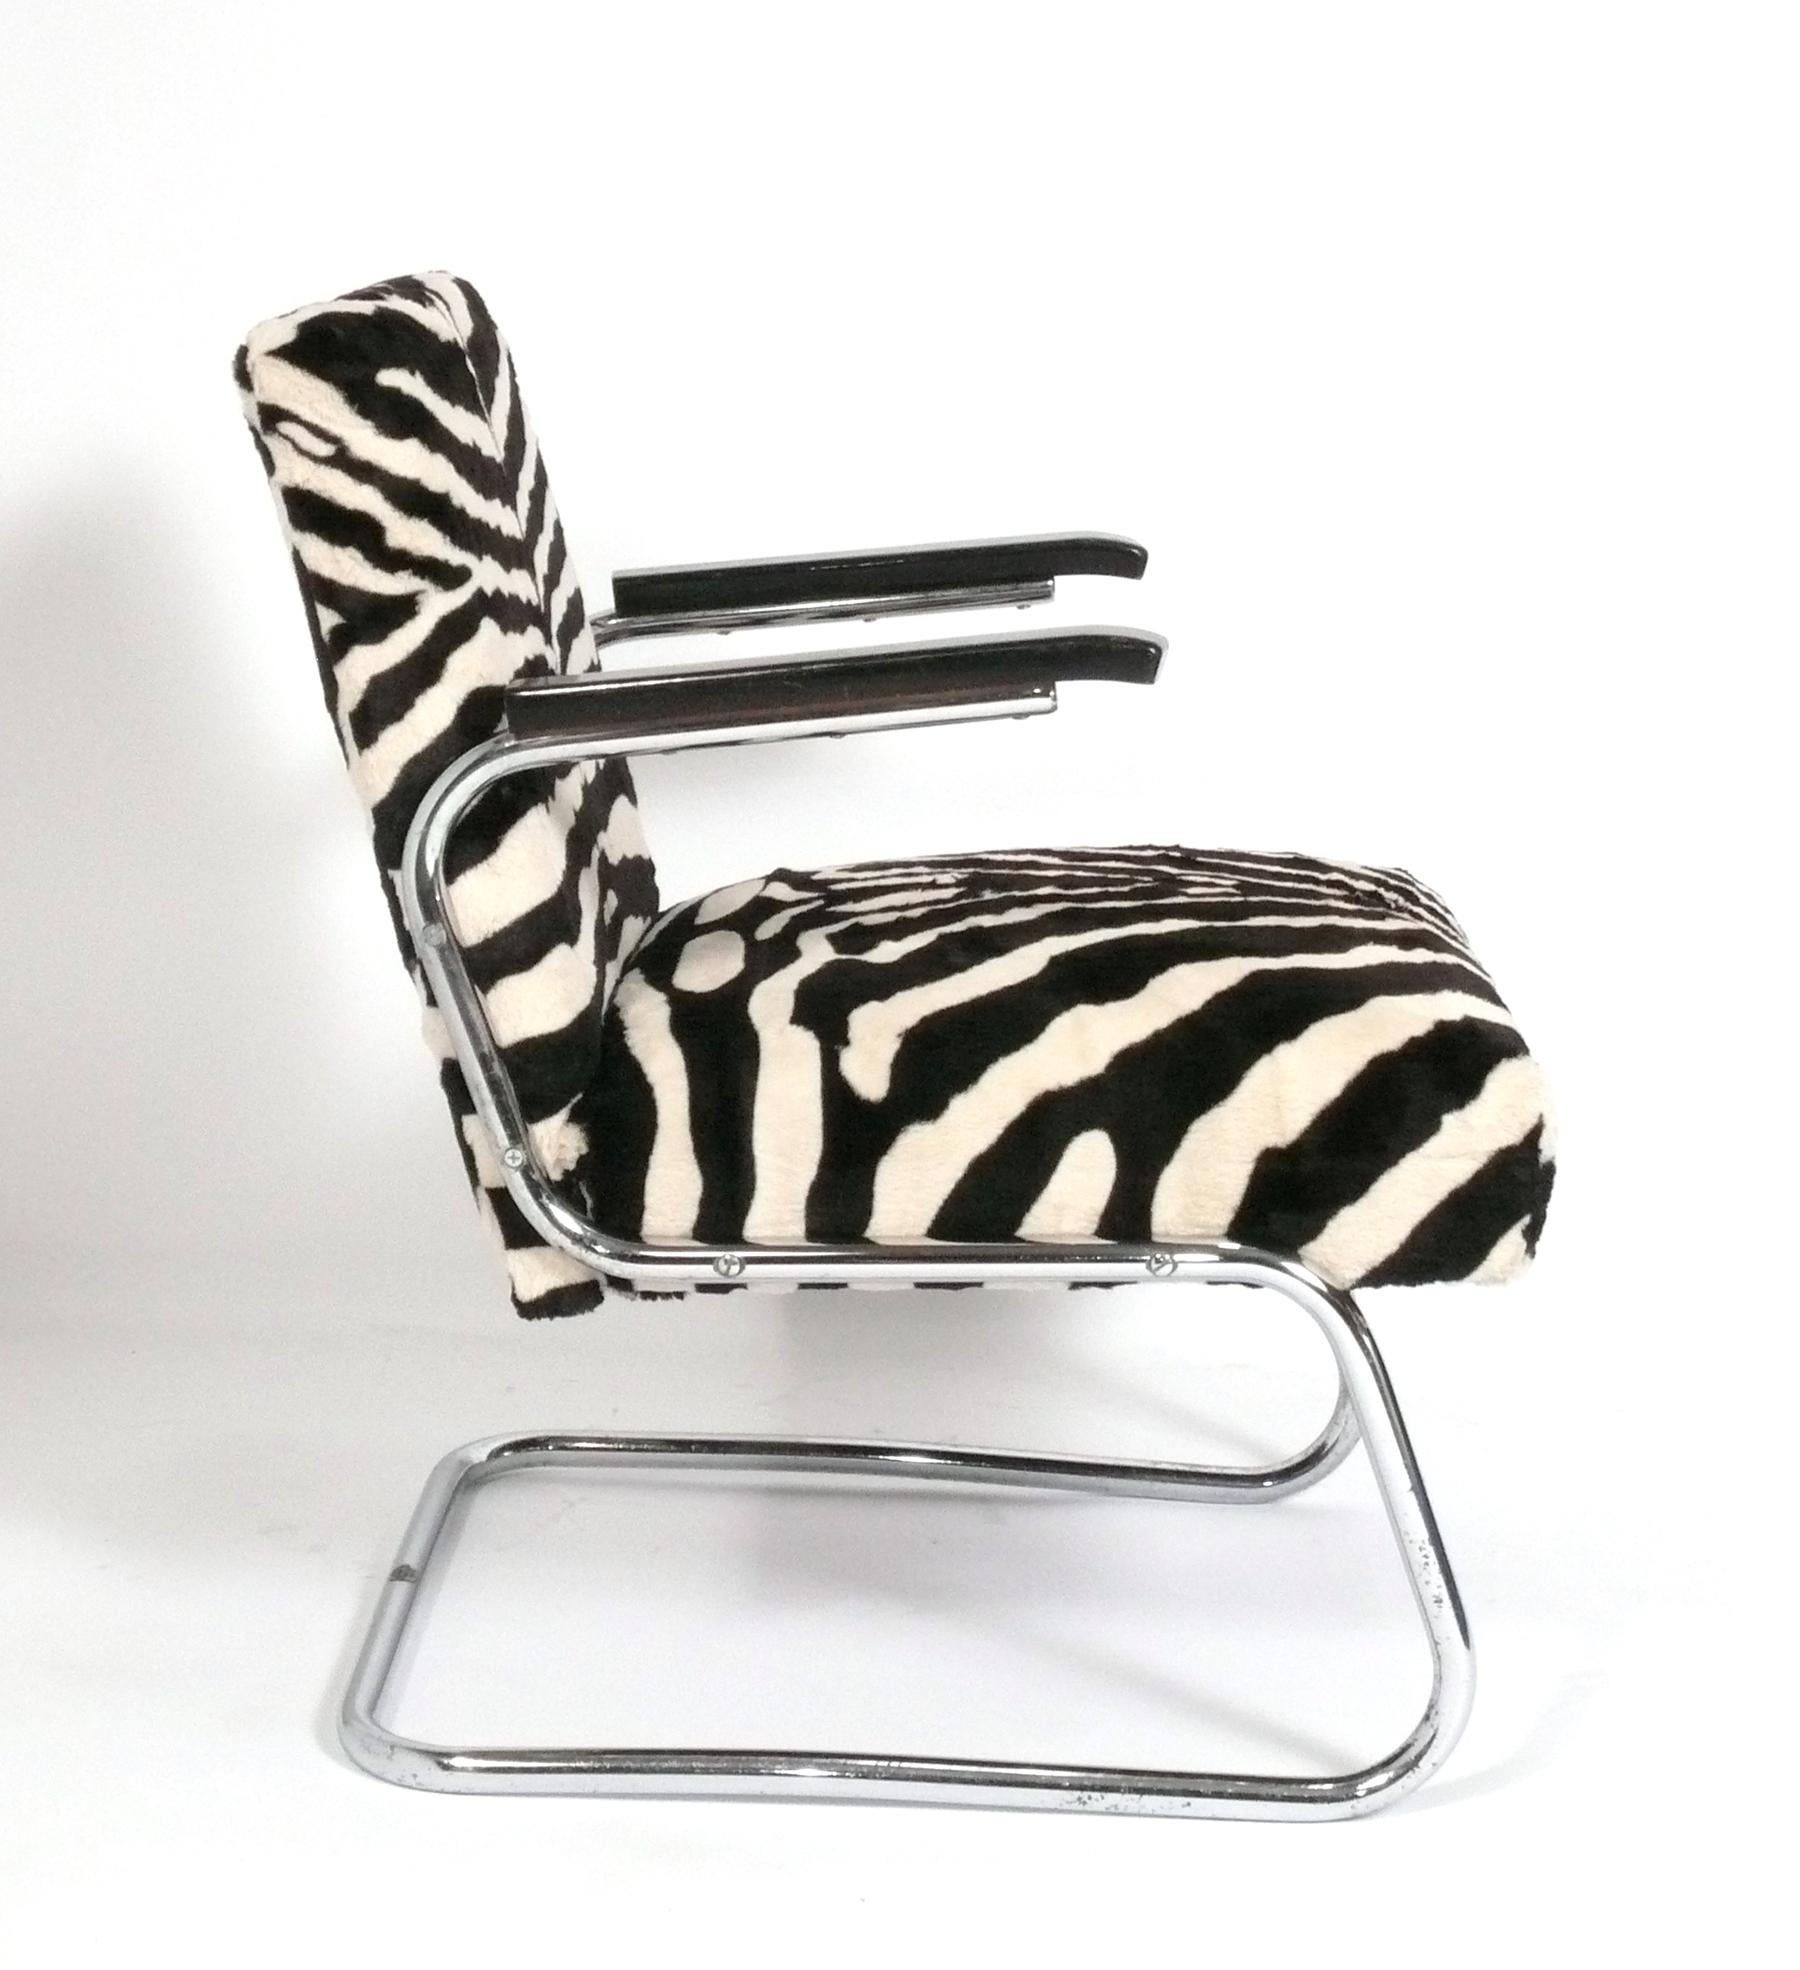 Art Deco Bauhaus Era Chrome Lounge chair, German, circa 1930s. It has recently been reupholstered in a velvety zebra print fabric. It is signed with a metal label on the bottom stretcher, which reads 